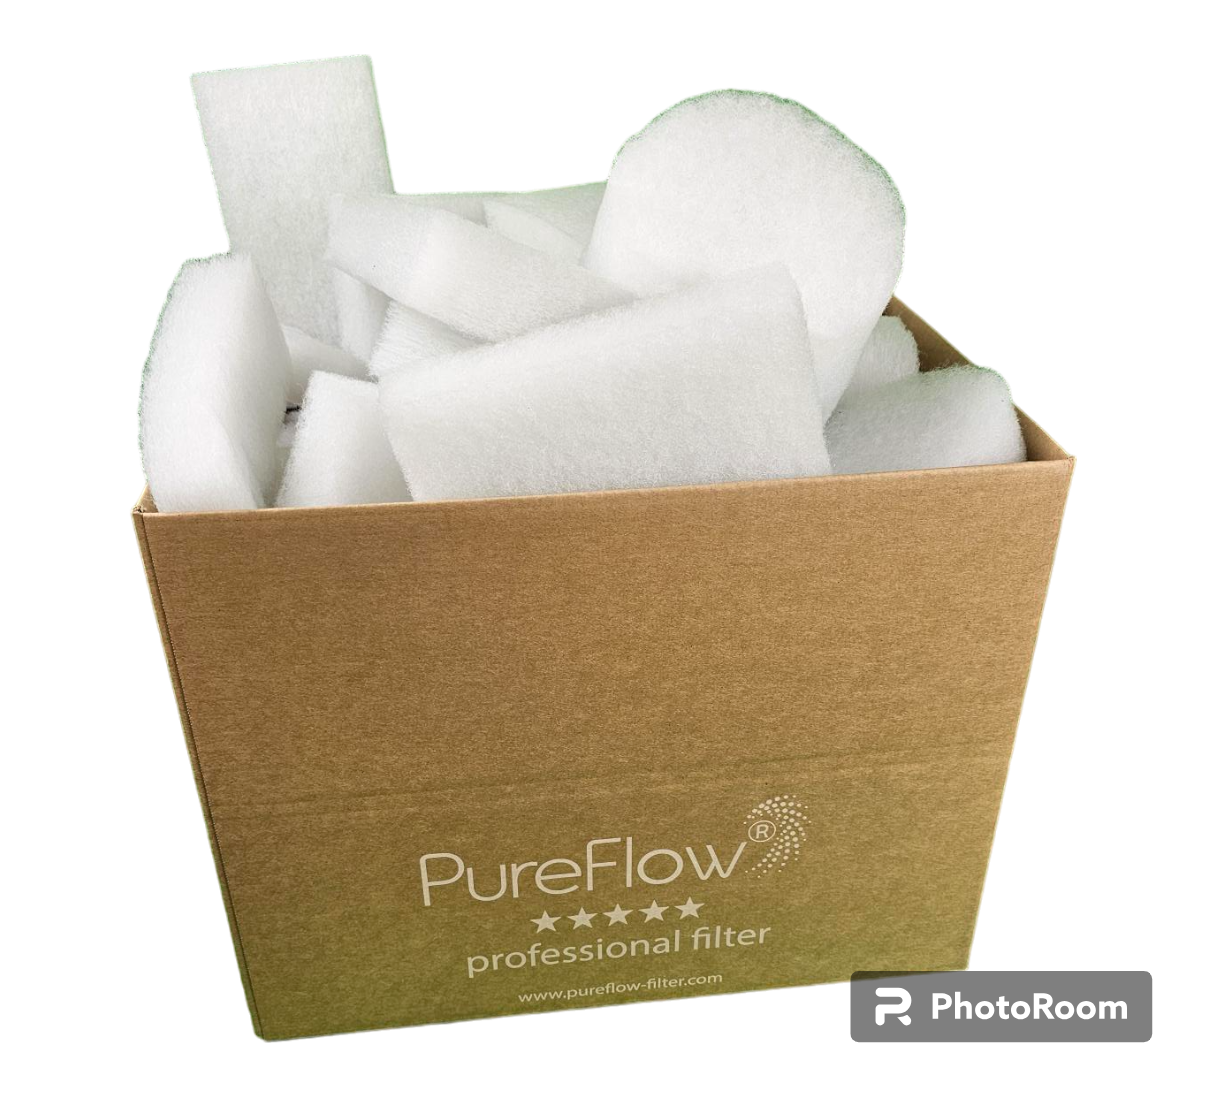 B-stock from PureFlow for cleaning, final cleaning, winter storage, ideal for cleaning at the start and end of the season as well as heavy soiling